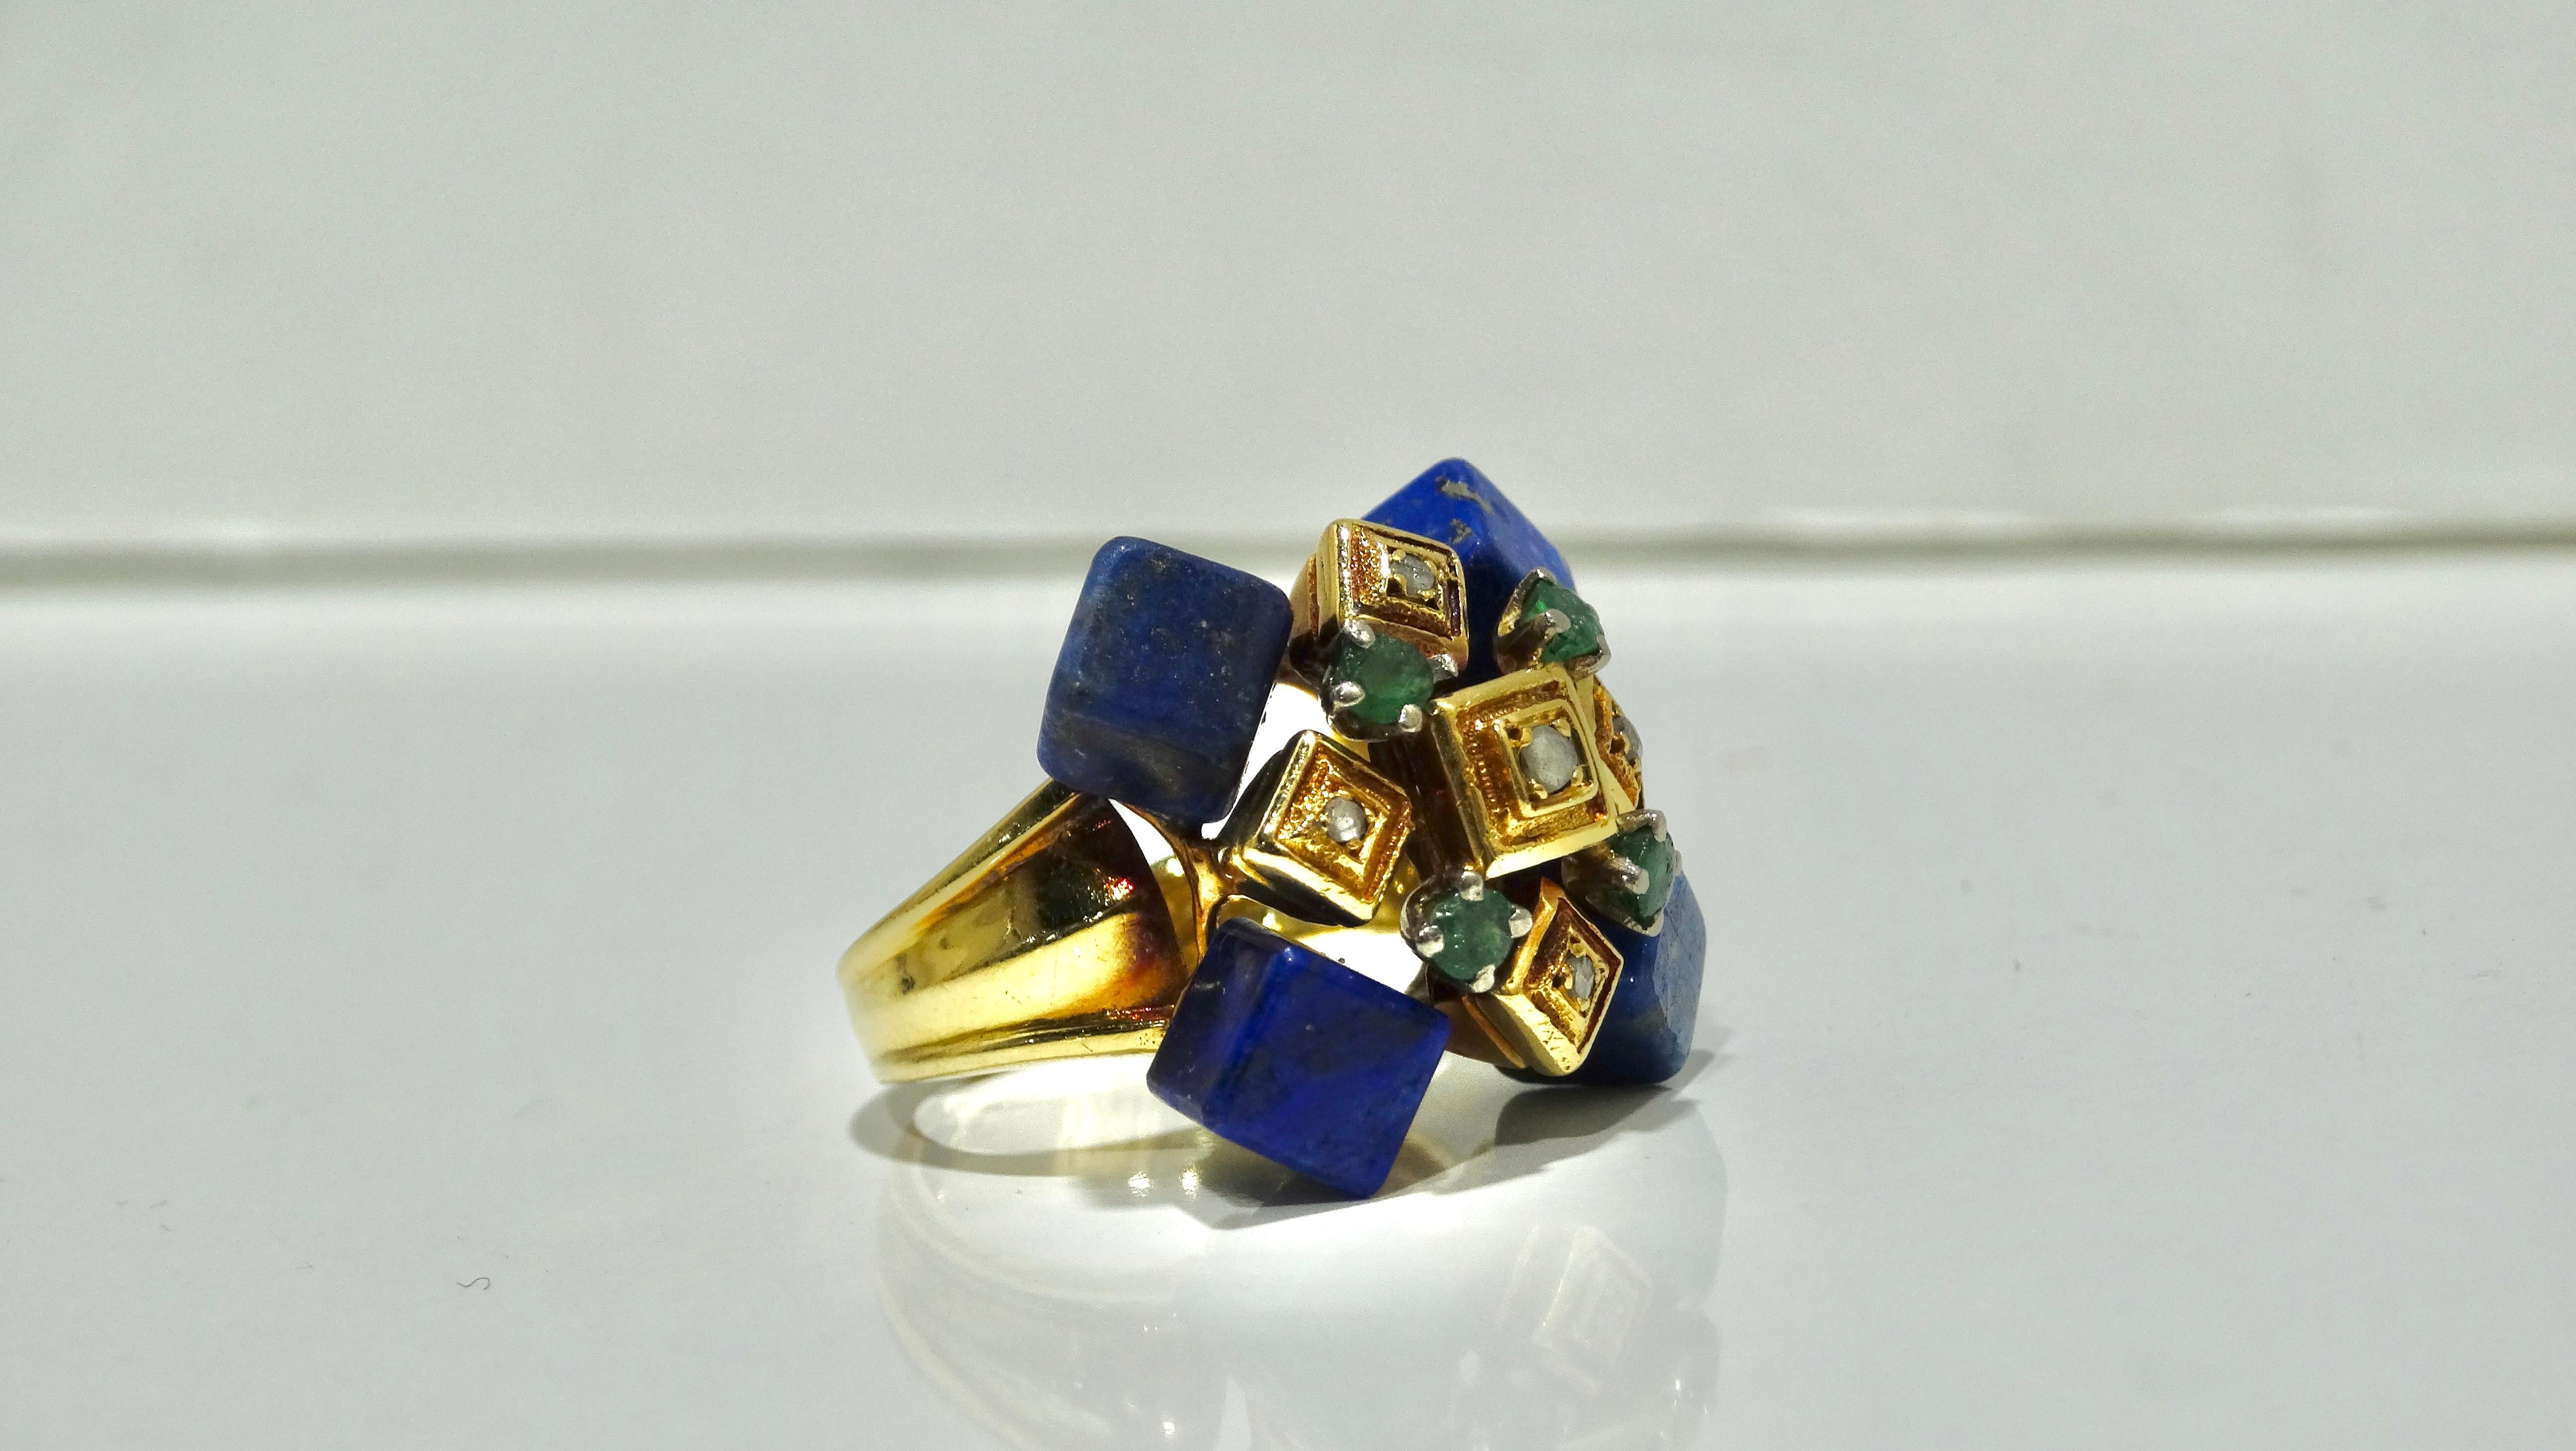 Beautiful Ilias Lalaounis, three stone ring containing 4 lapis lazuli cubes, 4 round cut Emeralds, and 5 rose cut diamonds. The band was made with 18k gold (marked 750). Ring weights 11.72 grams Size 5 